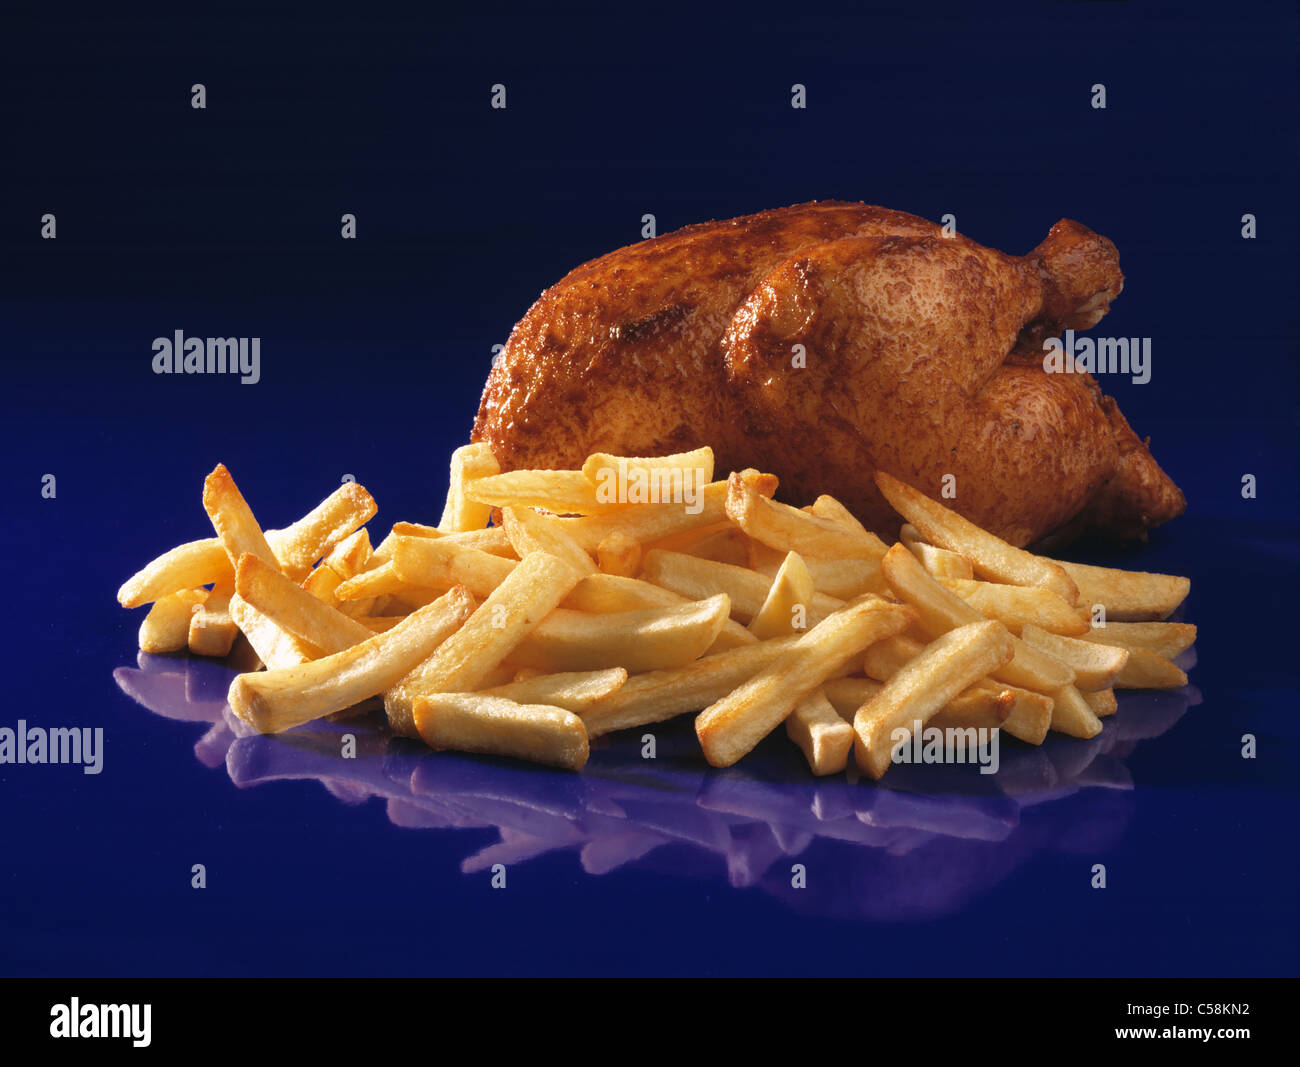 Cut out: Fried chicken and french fries Stock Photo